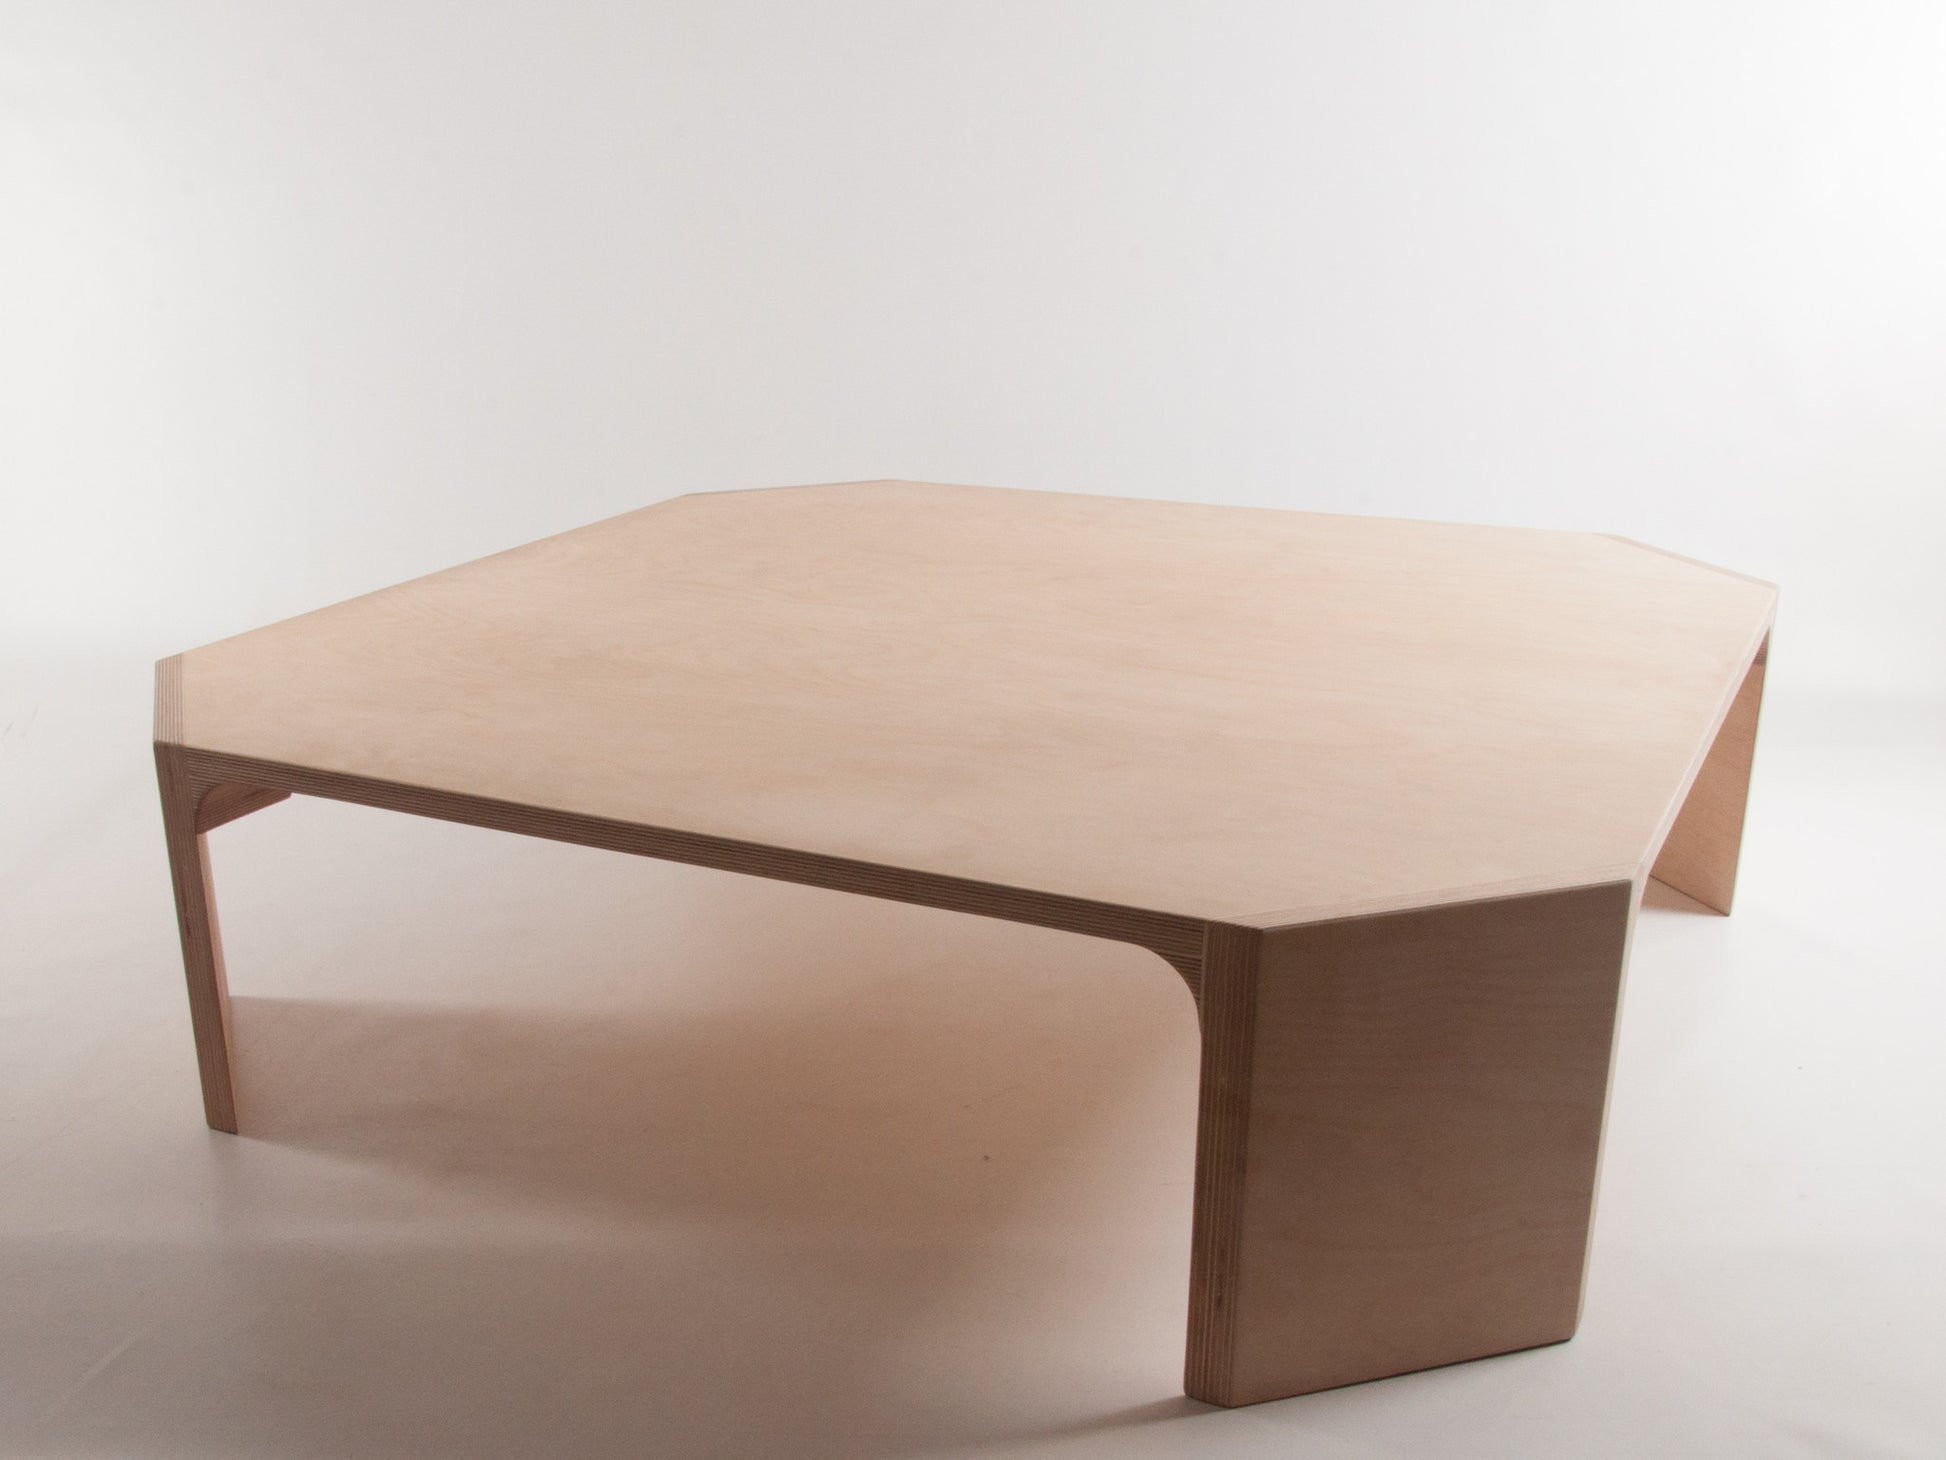 Octable Coffee Table - Bee9
 - 3